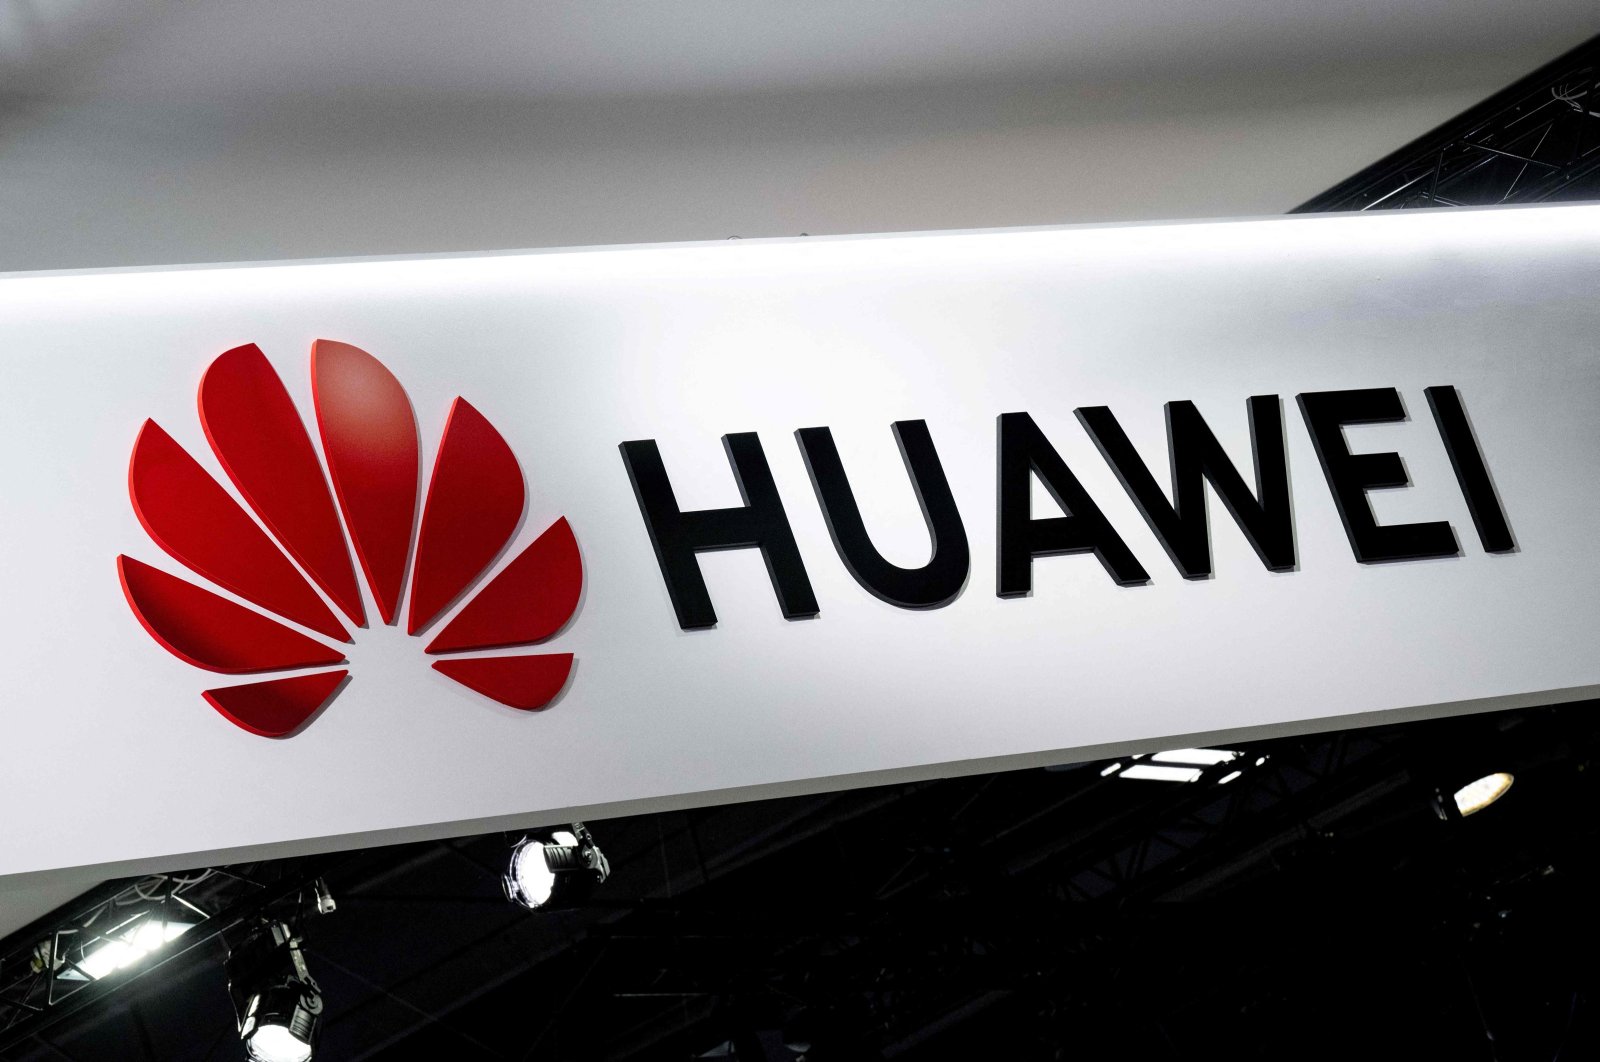 French authorities raid Chinese tech giant Huawei’s offices